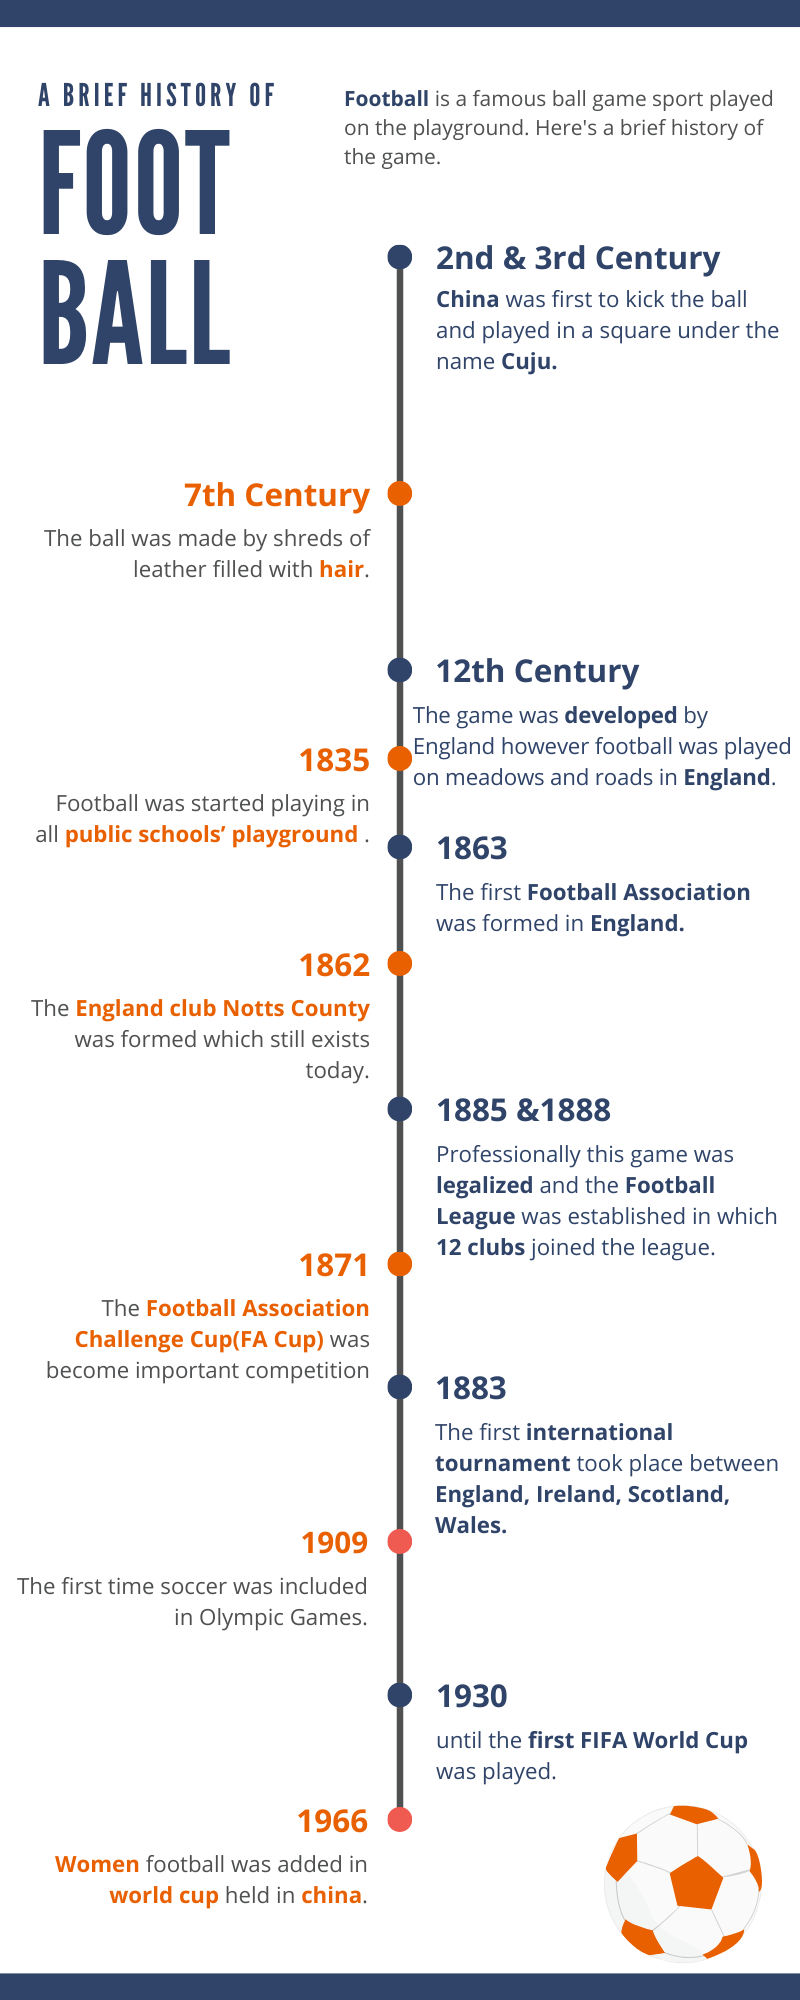 The brief history of Football